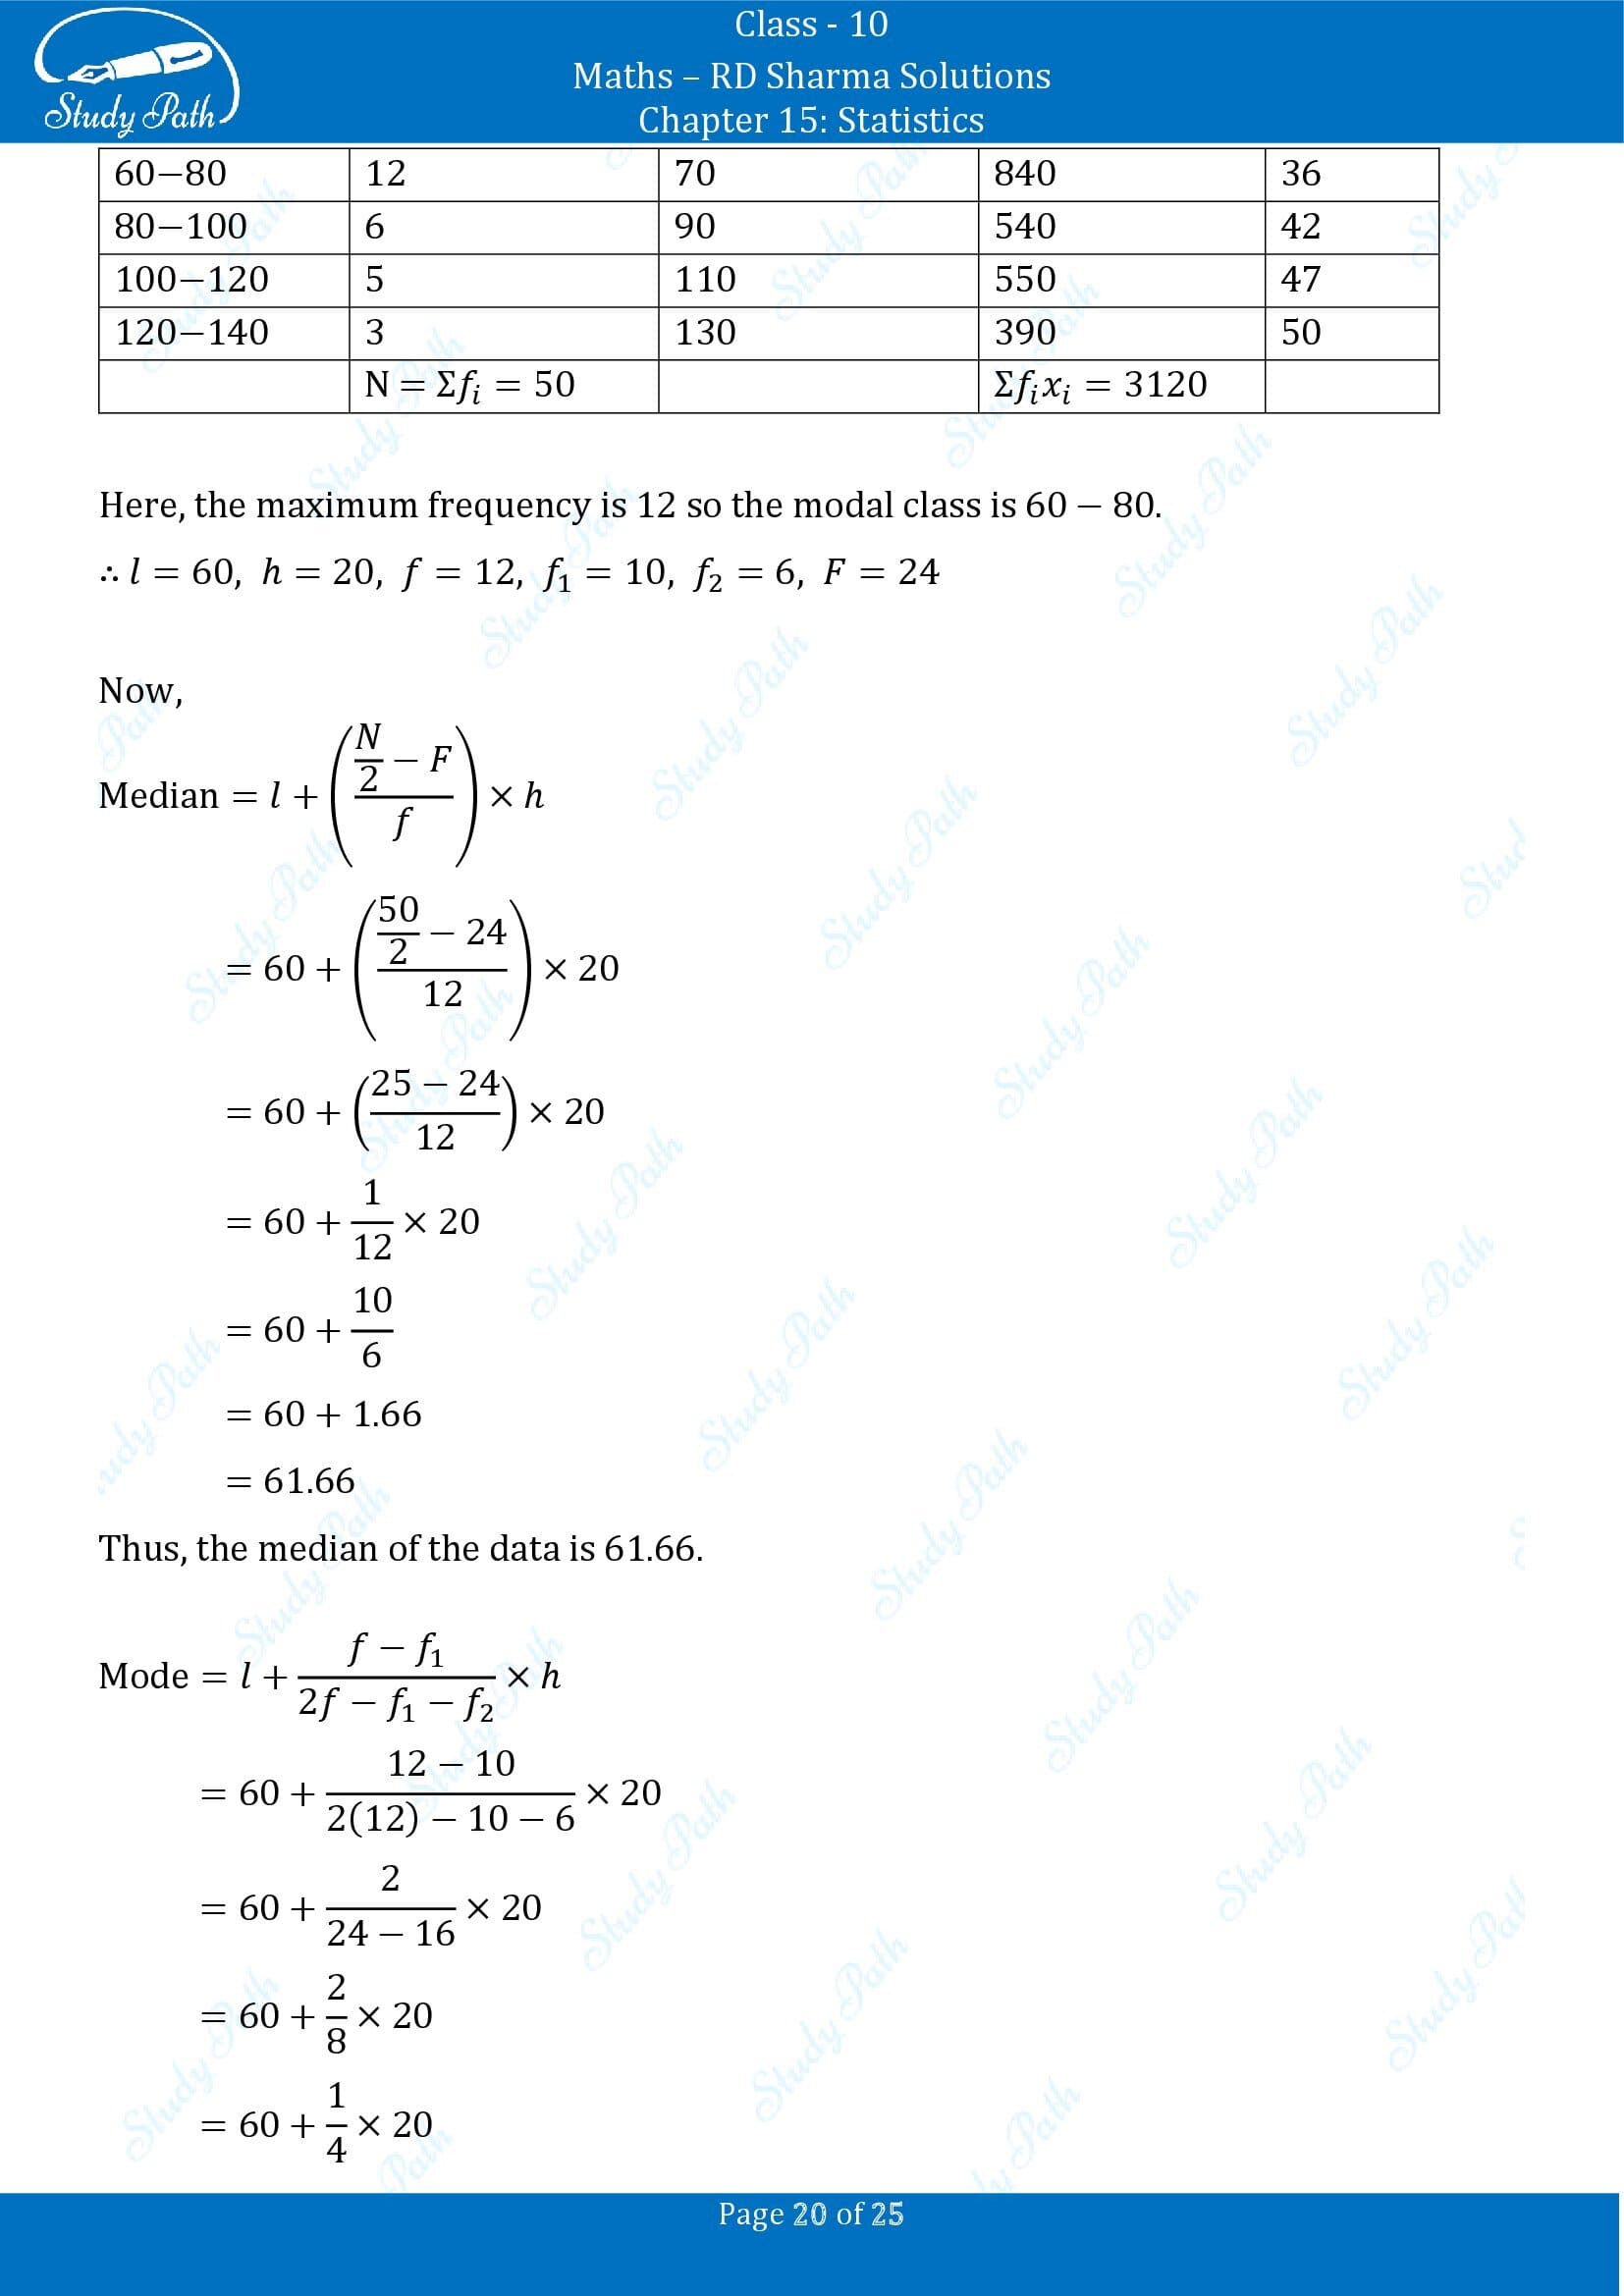 RD Sharma Solutions Class 10 Chapter 15 Statistics Exercise 15.5 00020